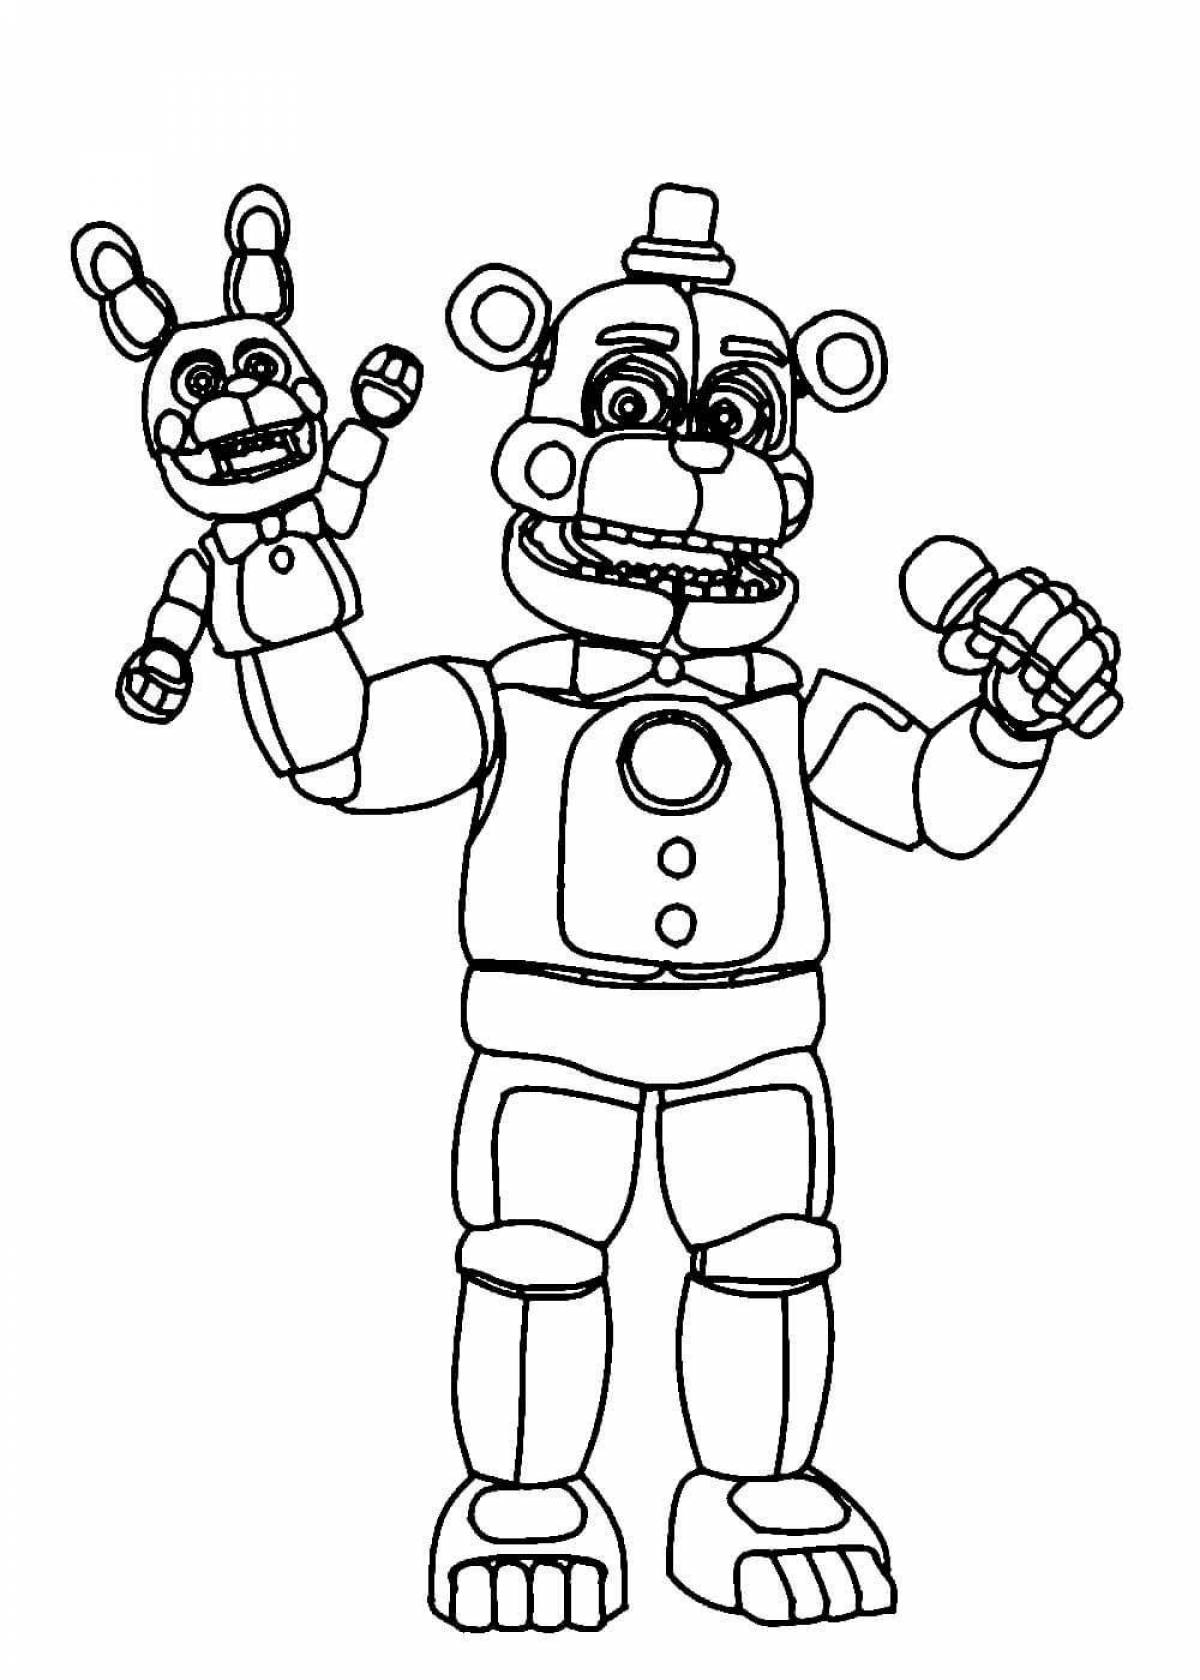 Mesmerizing freddy robot coloring page